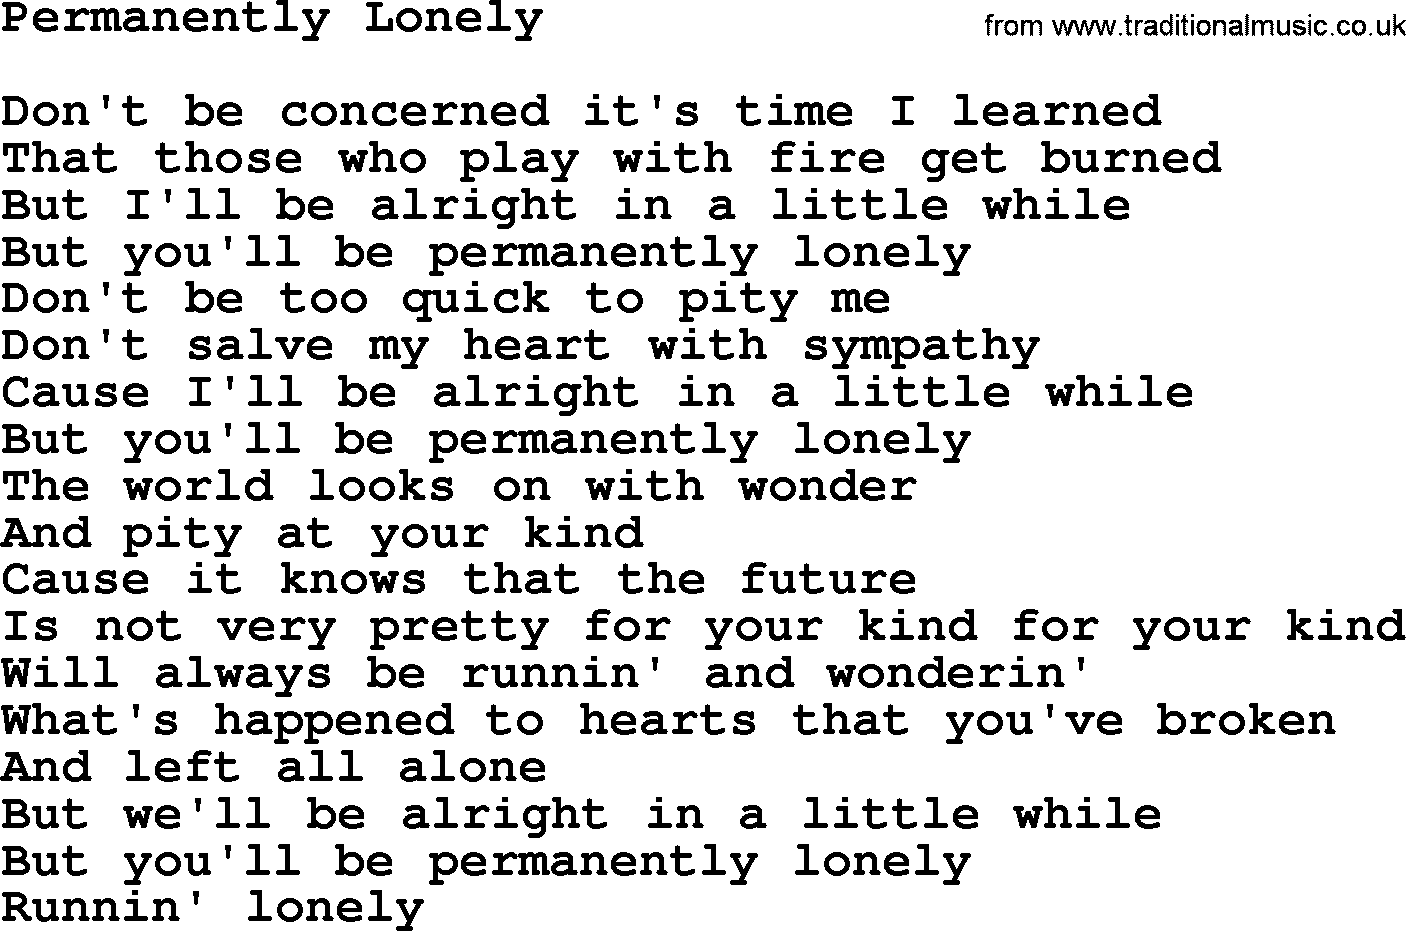 Willie Nelson song: Permanently Lonely lyrics